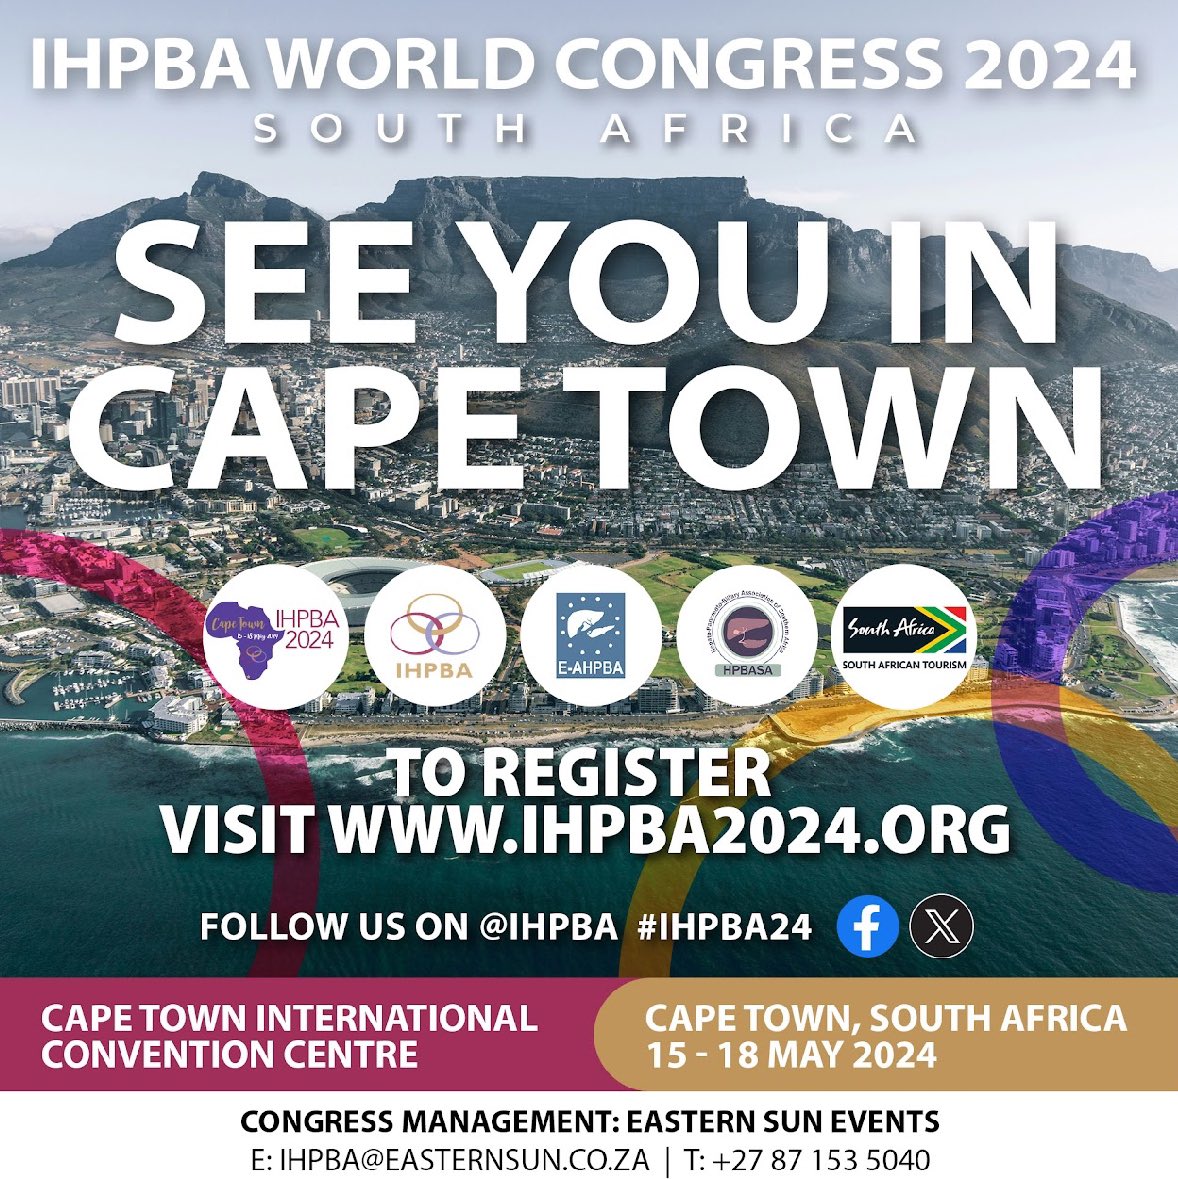 Looking forward to #IHPBA2024 #CapeTown 🇿🇦! Meeting up with old and new friends and exciting new evidence RCTs to be discussed! Incl DIPLOMA-2 trial results and newest in #pancreas #liver #biliary #cancer #surgery #robot #laparoscopy #neoadjuvant #pancreatitis ➡️program now…